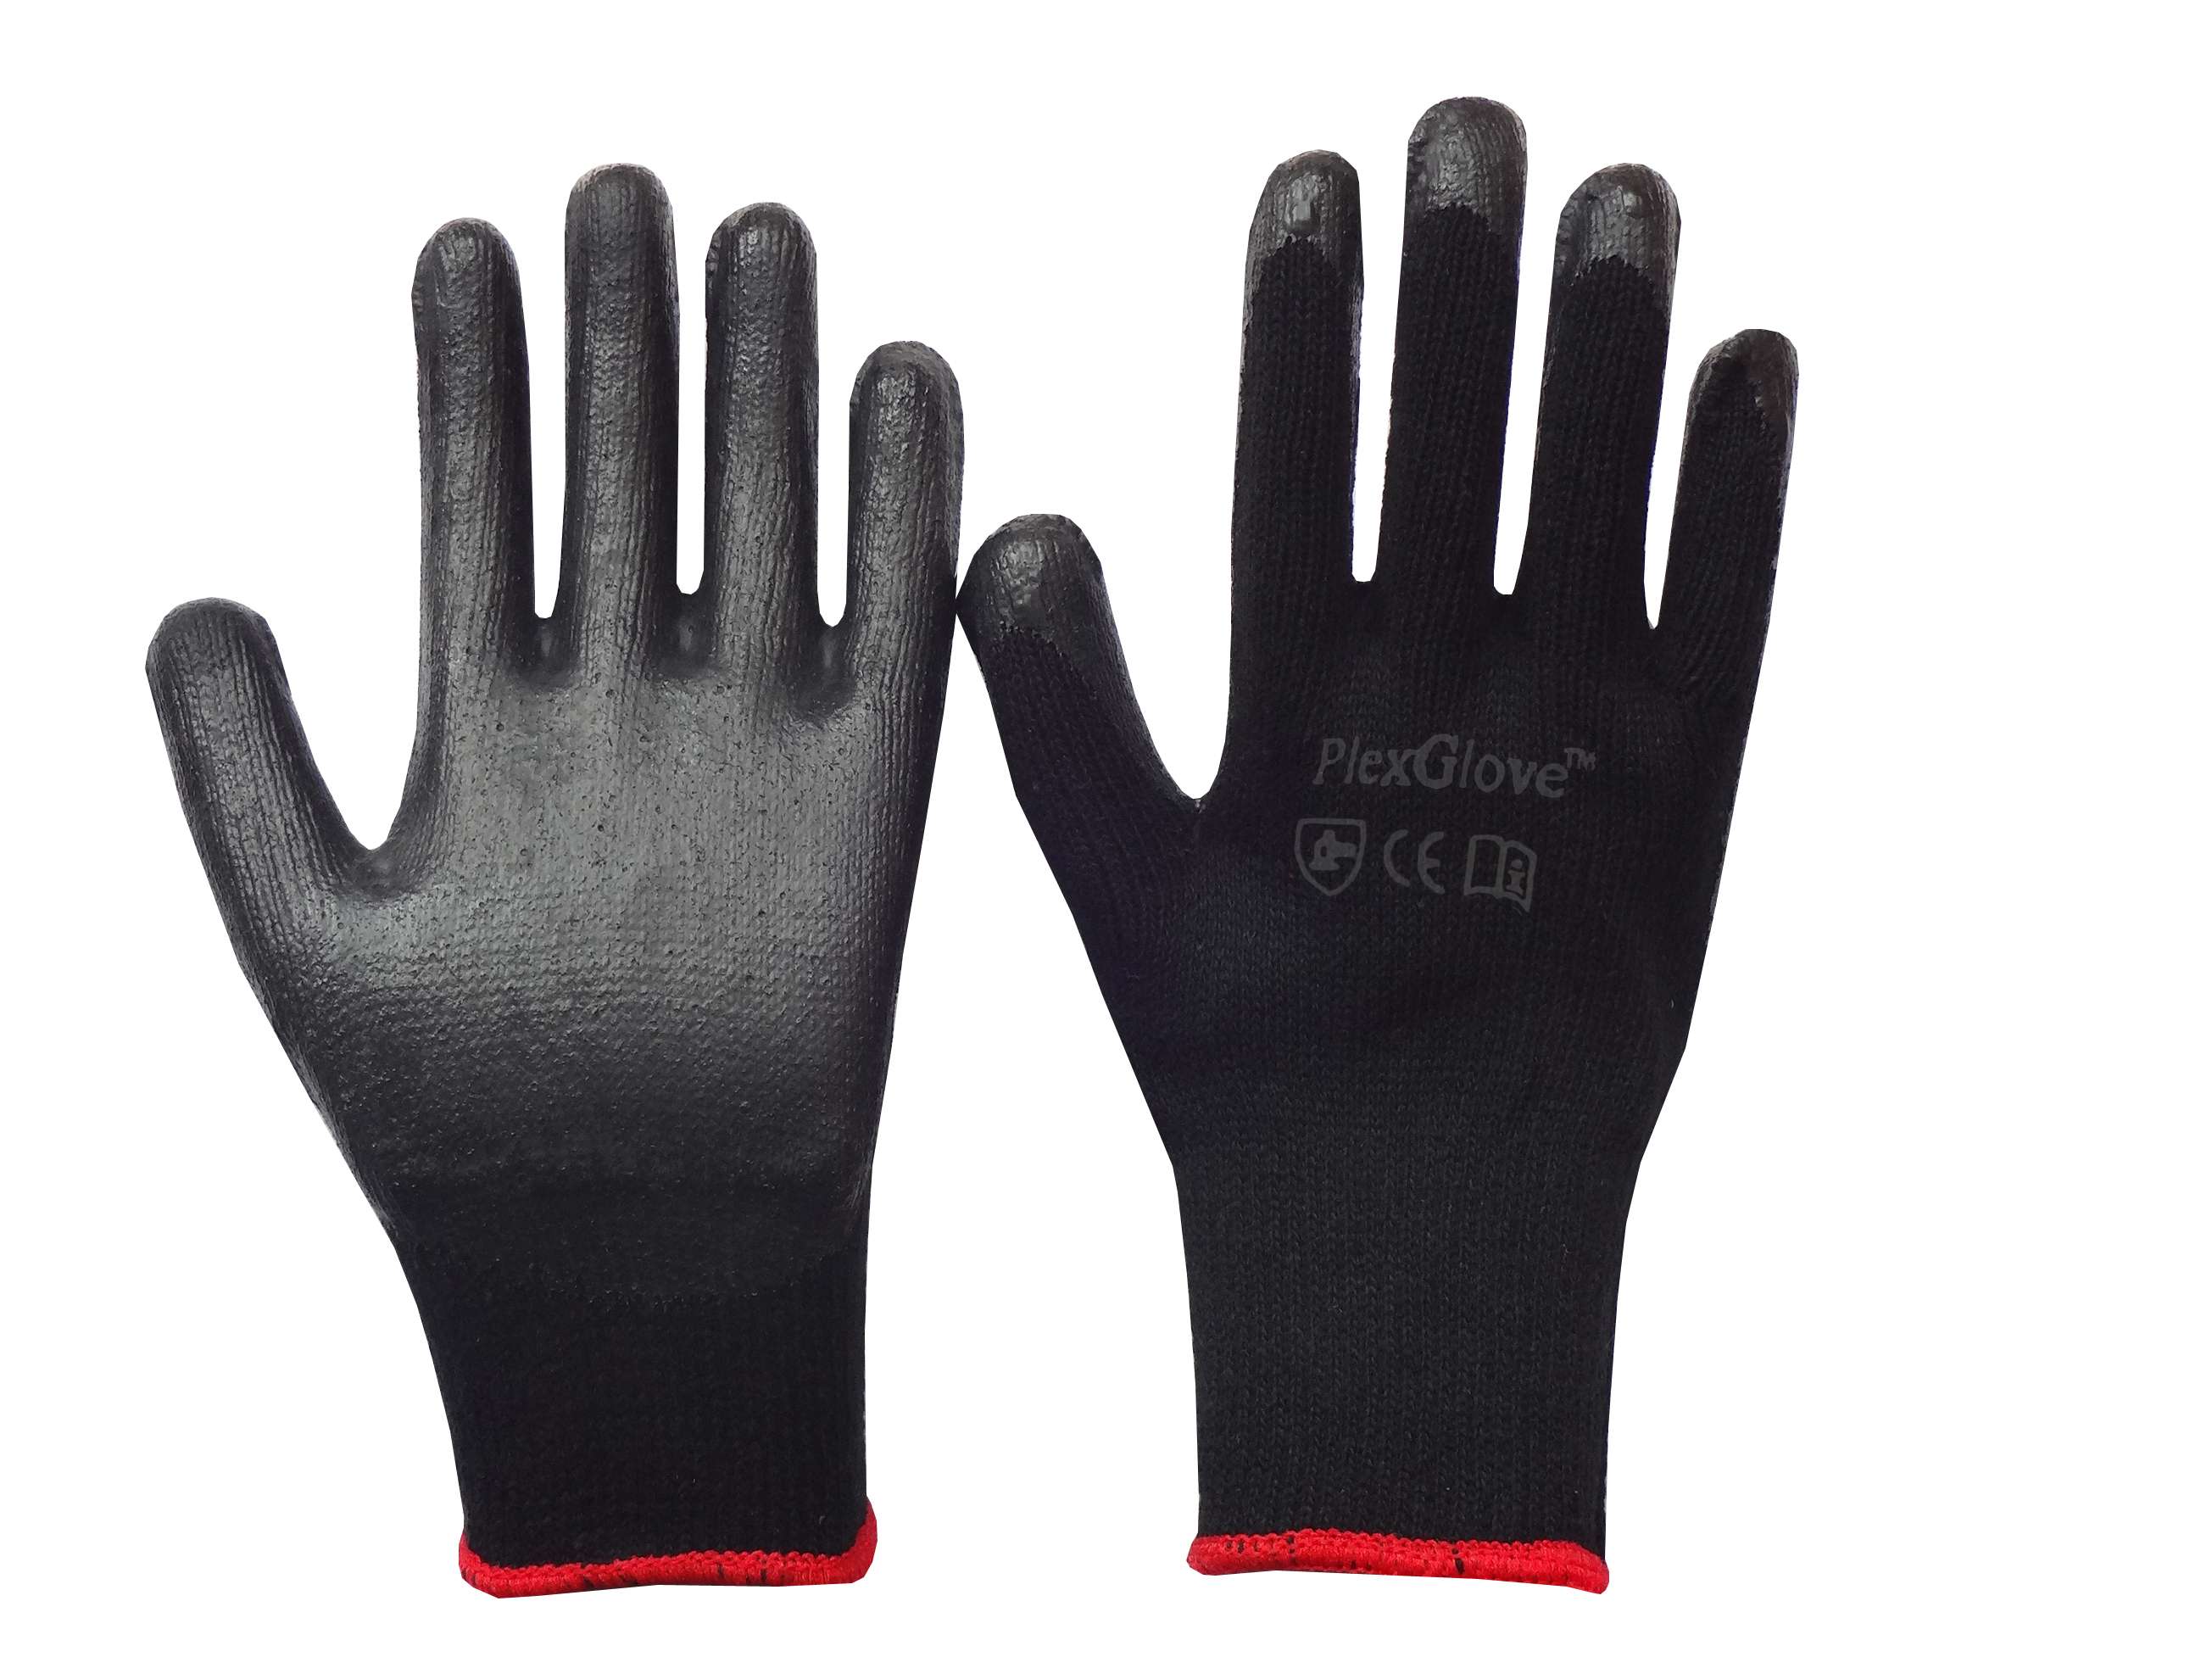 Large Black Cotton String Knit Work Gloves with Black Latex Dipped Palm, 144 Pairs/Case - 1